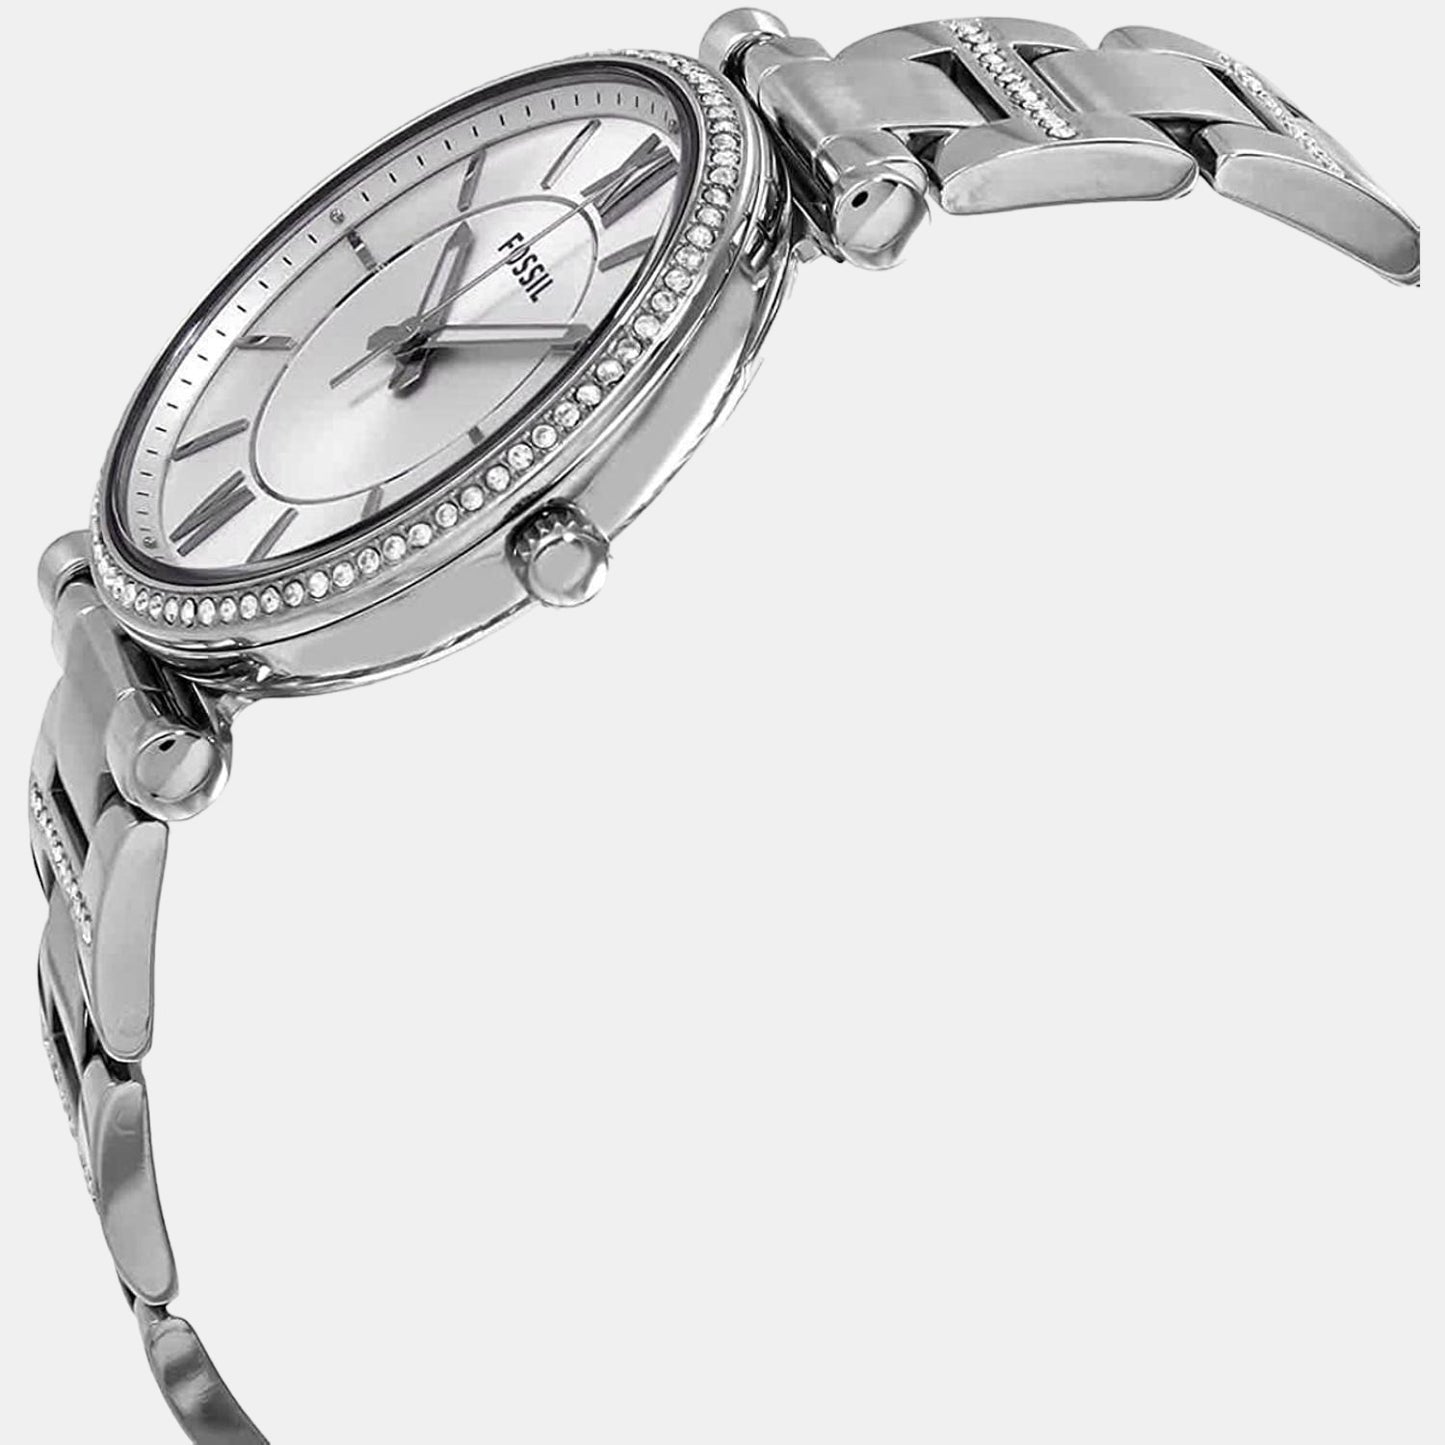 Female Silver Analog Stainless Steel Watch ES4341